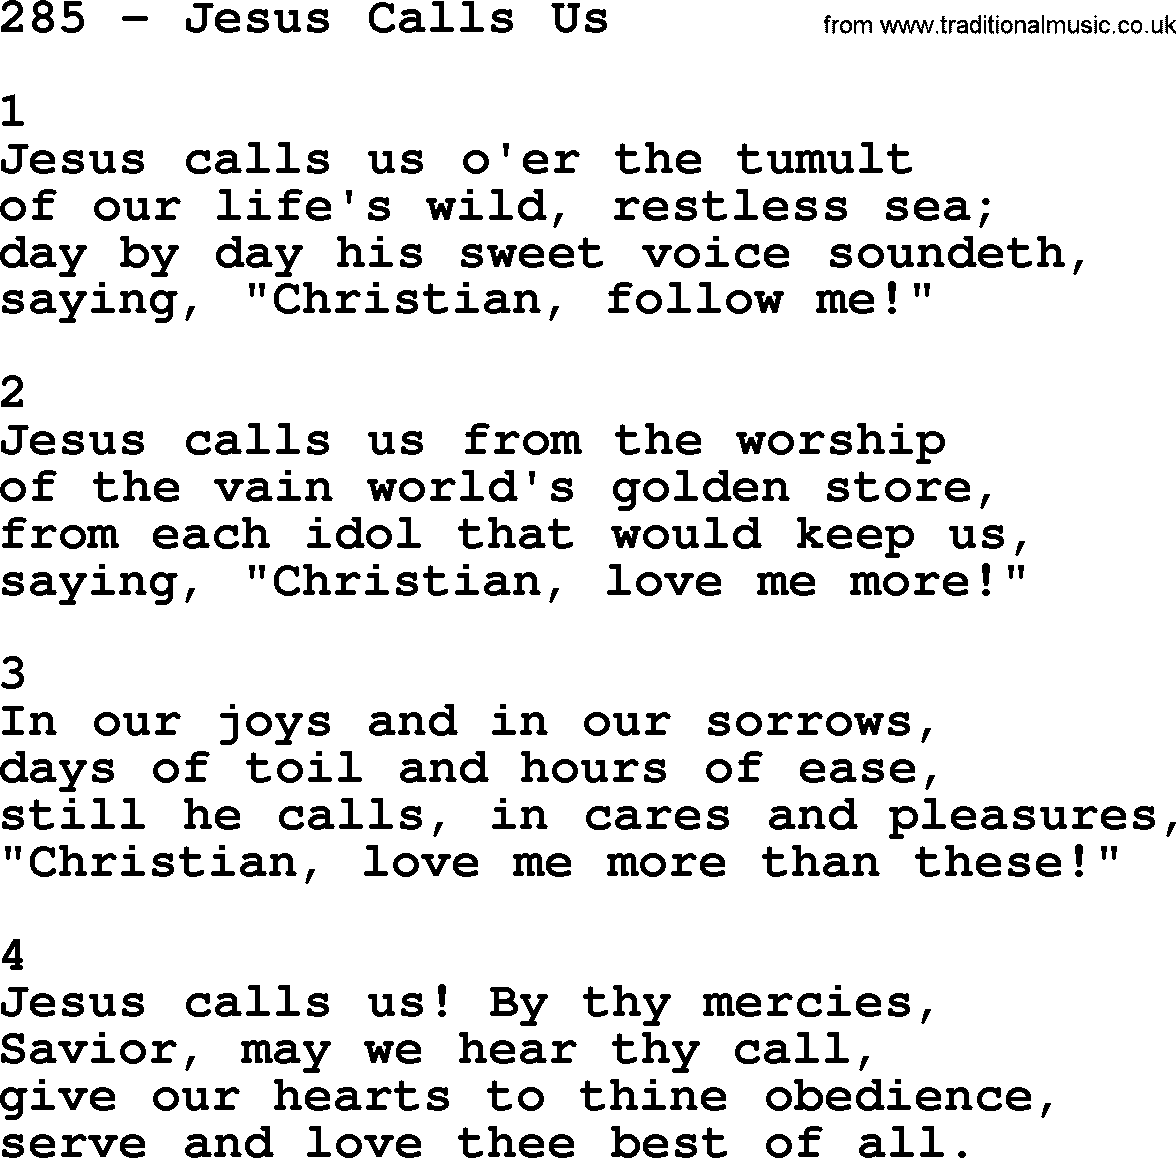 Complete Adventis Hymnal, title: 285-Jesus Calls Us, with lyrics, midi, mp3, powerpoints(PPT) and PDF,